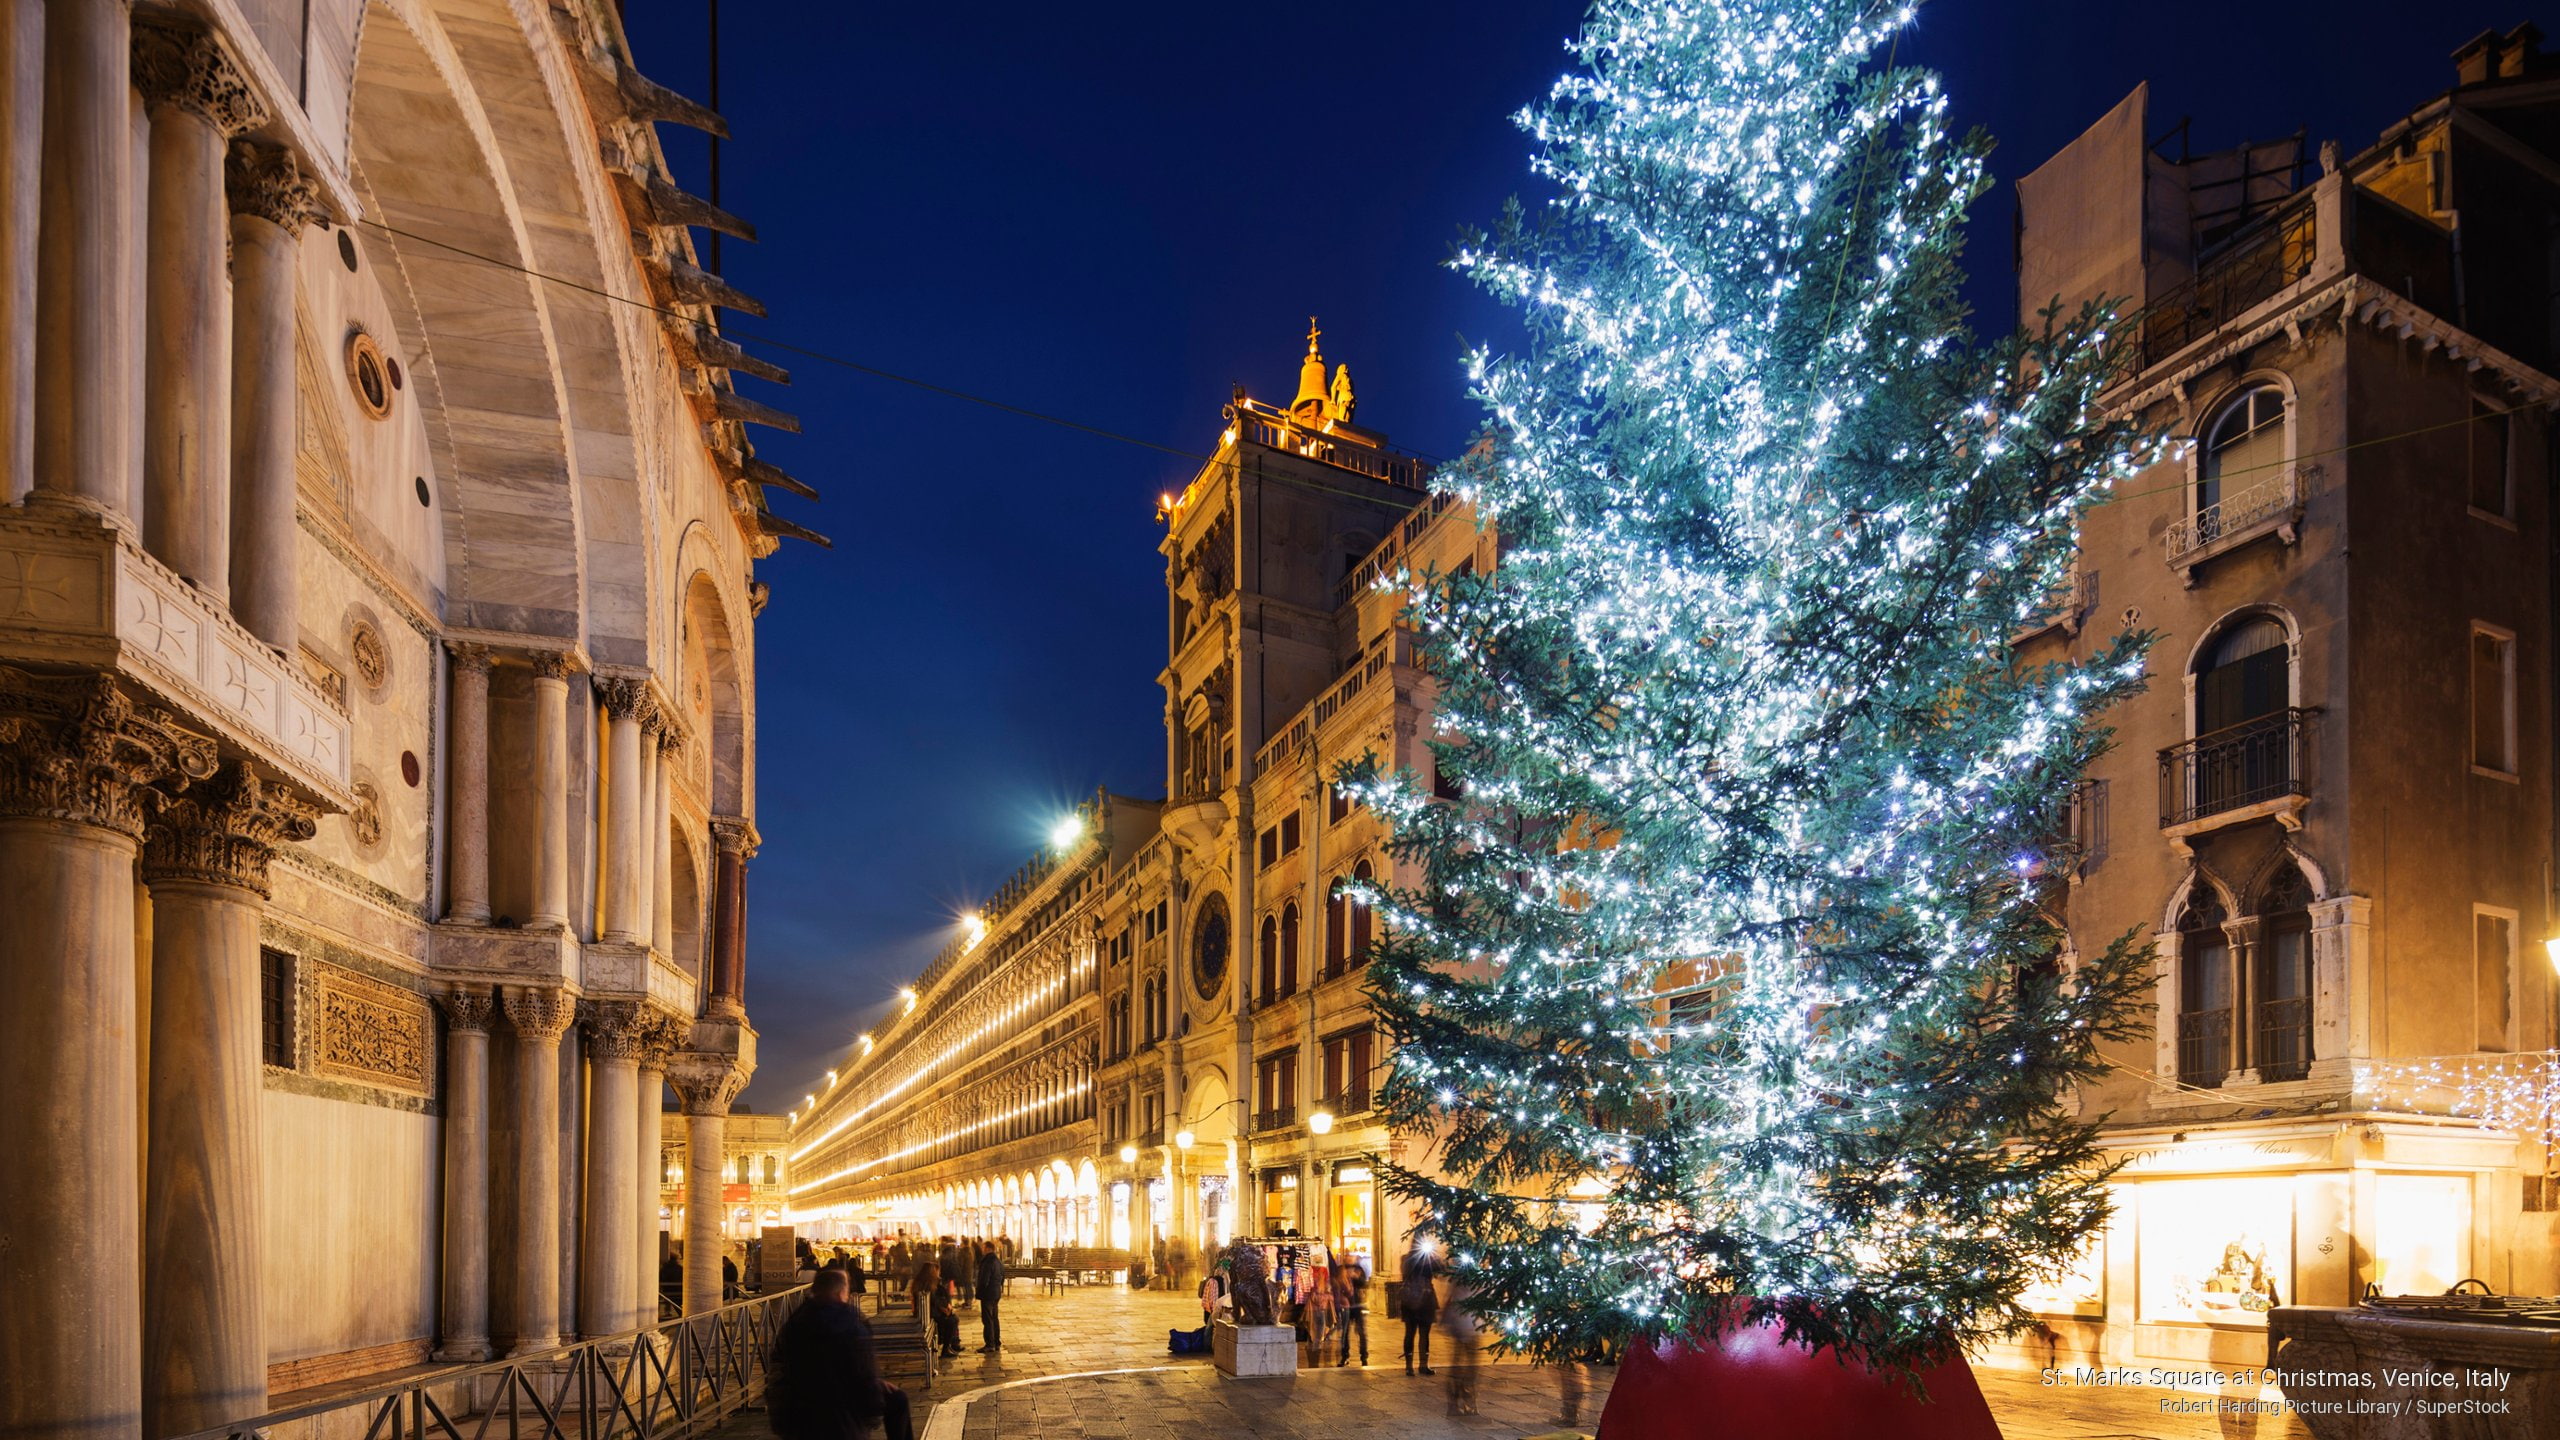 St. Marks Square at Christmas, Venice, Italy, Holidays